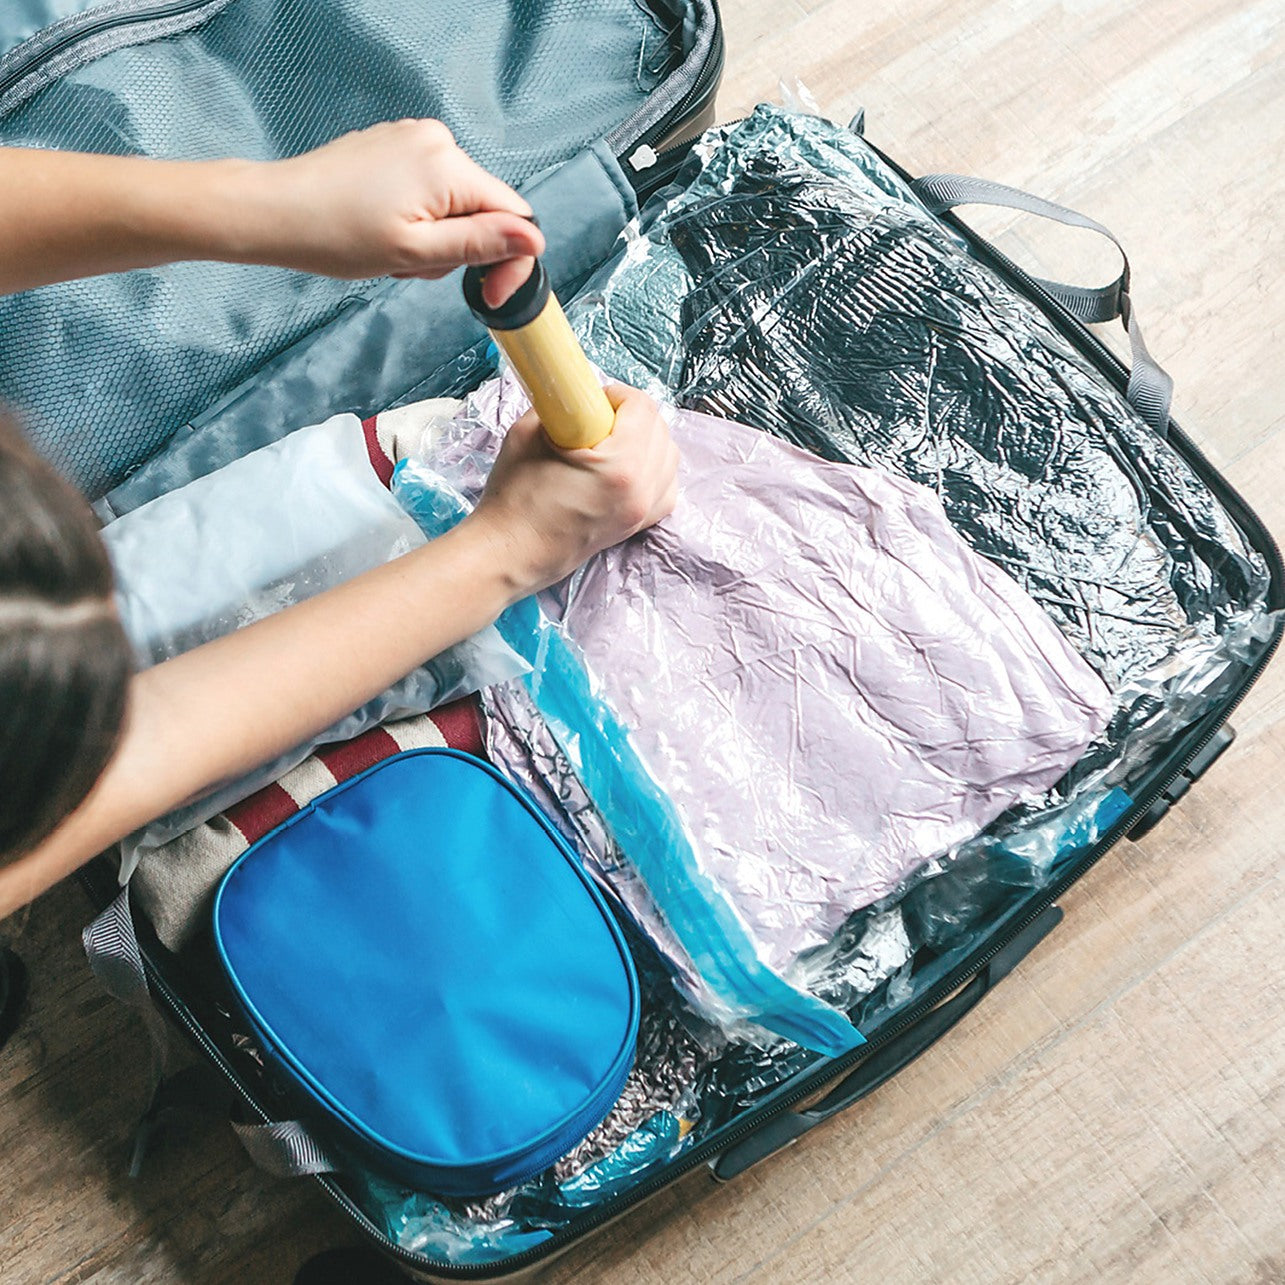 Packing Clothes into Travel Bag - Luggage and People Concept Stock Photo -  Image of belongings, clothing: 94722210